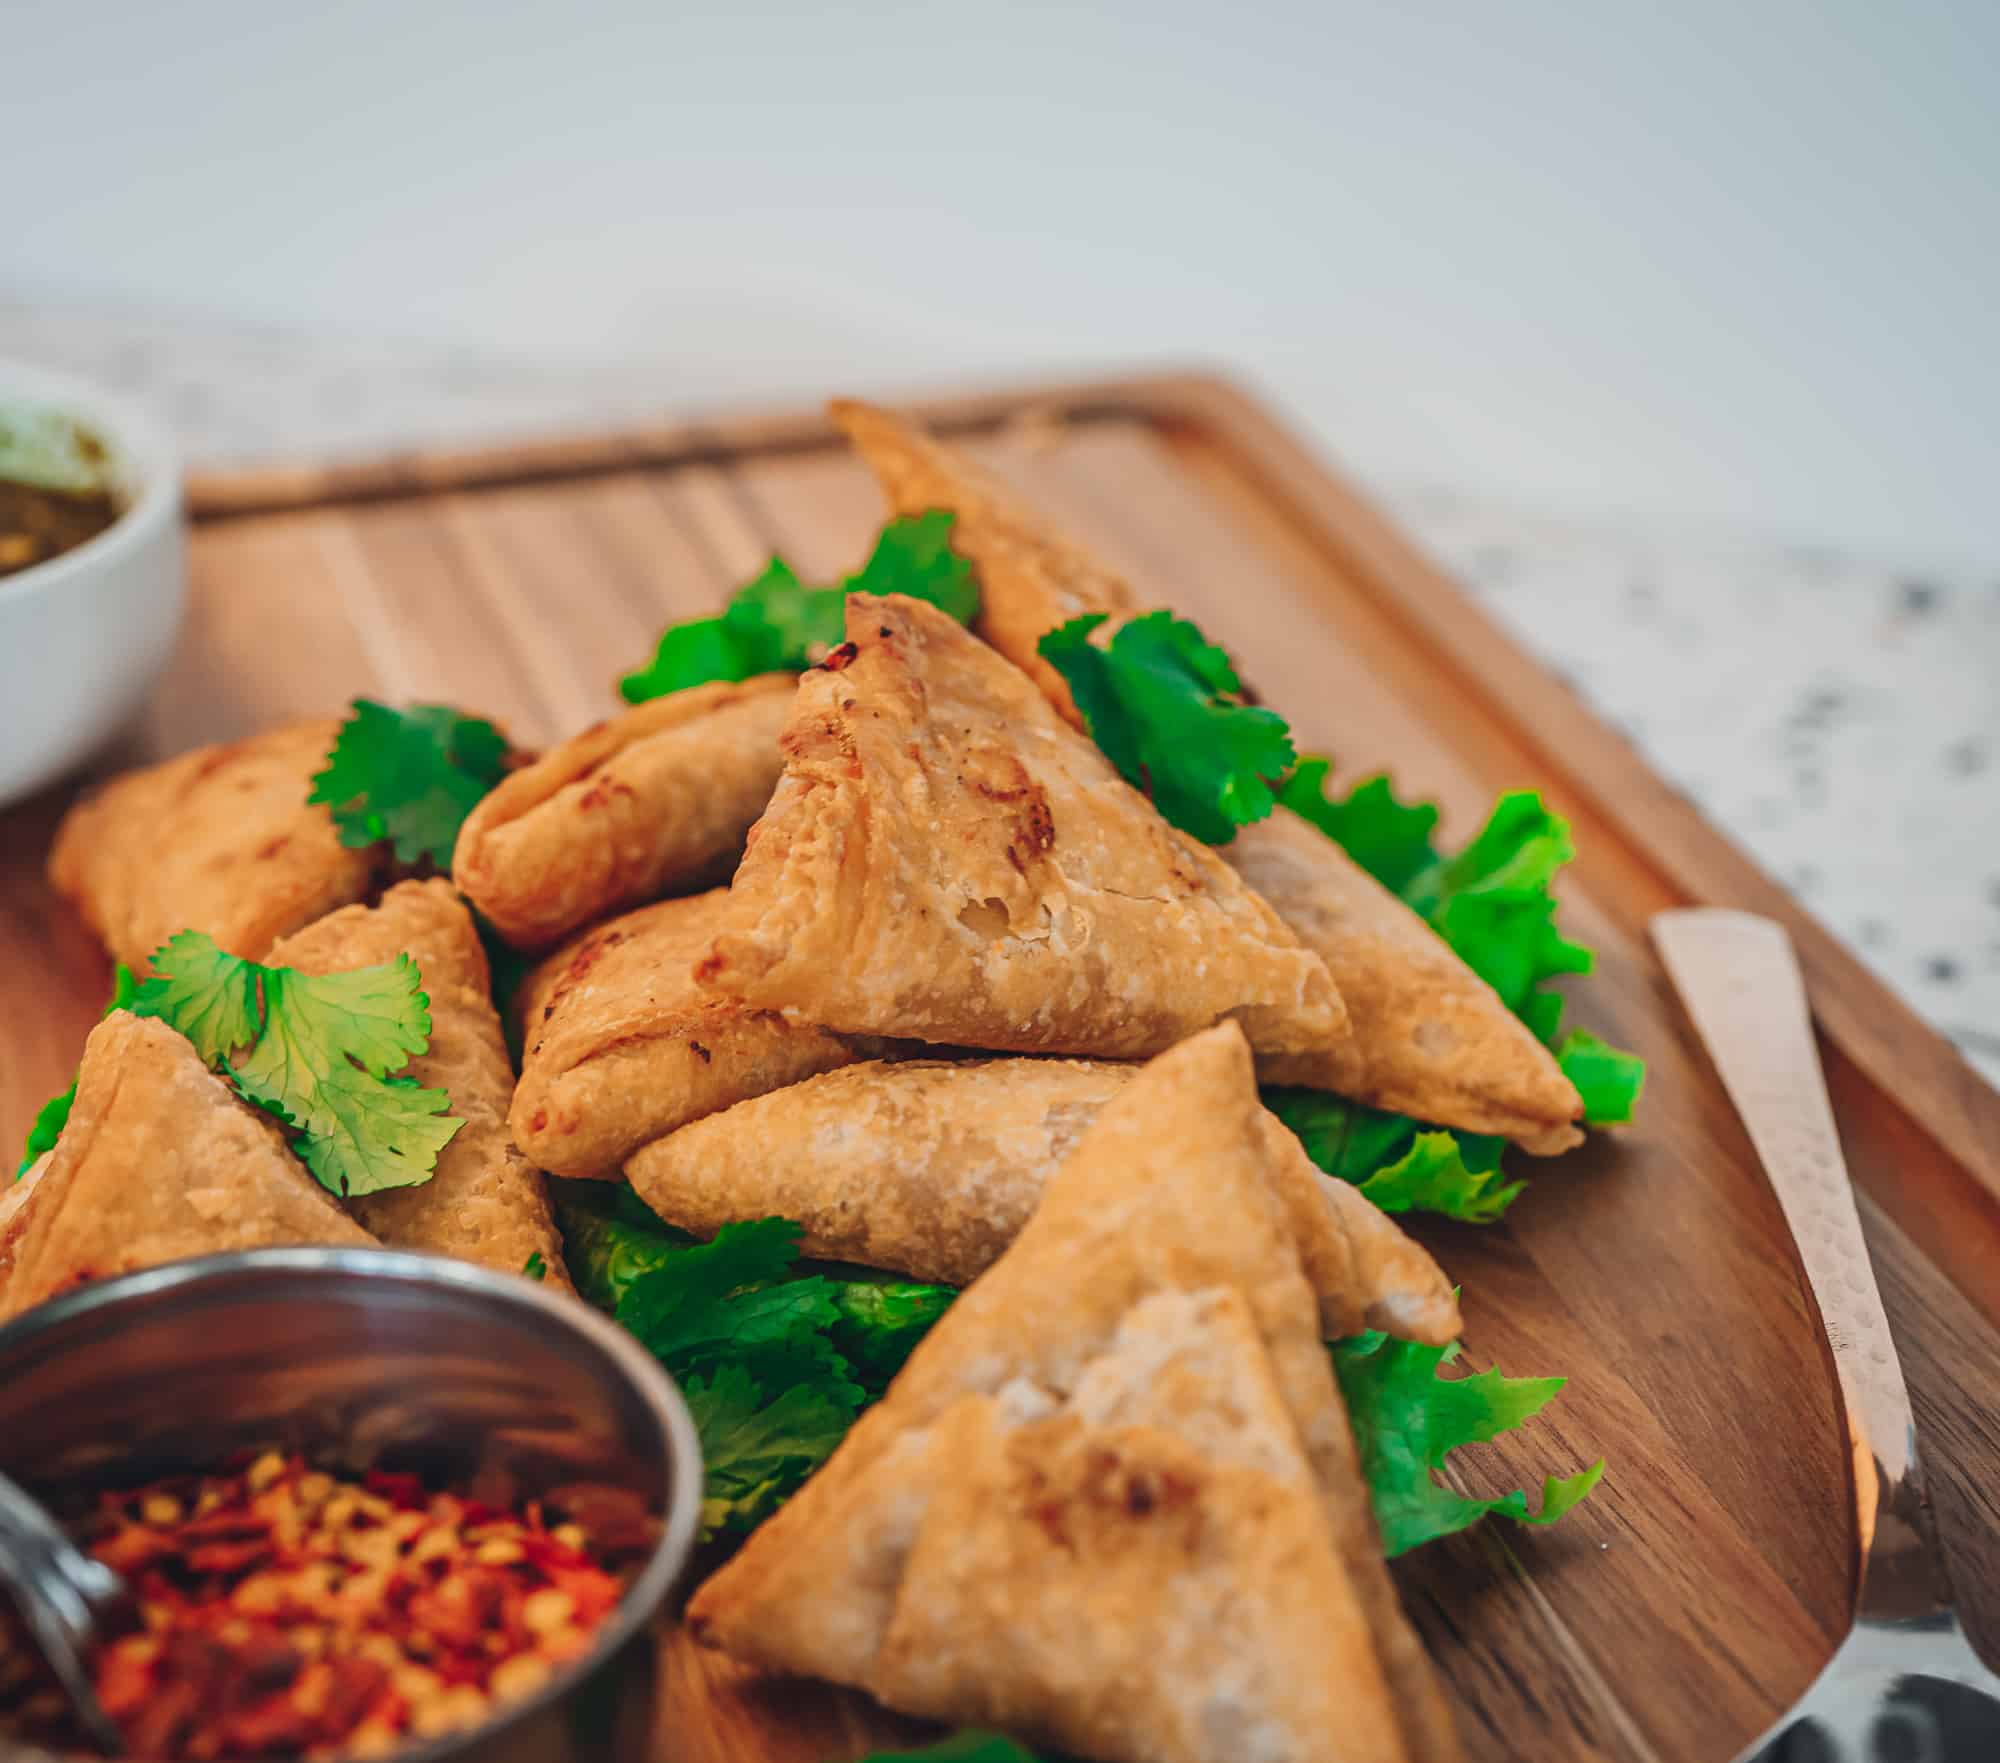 What Is A Samosa?